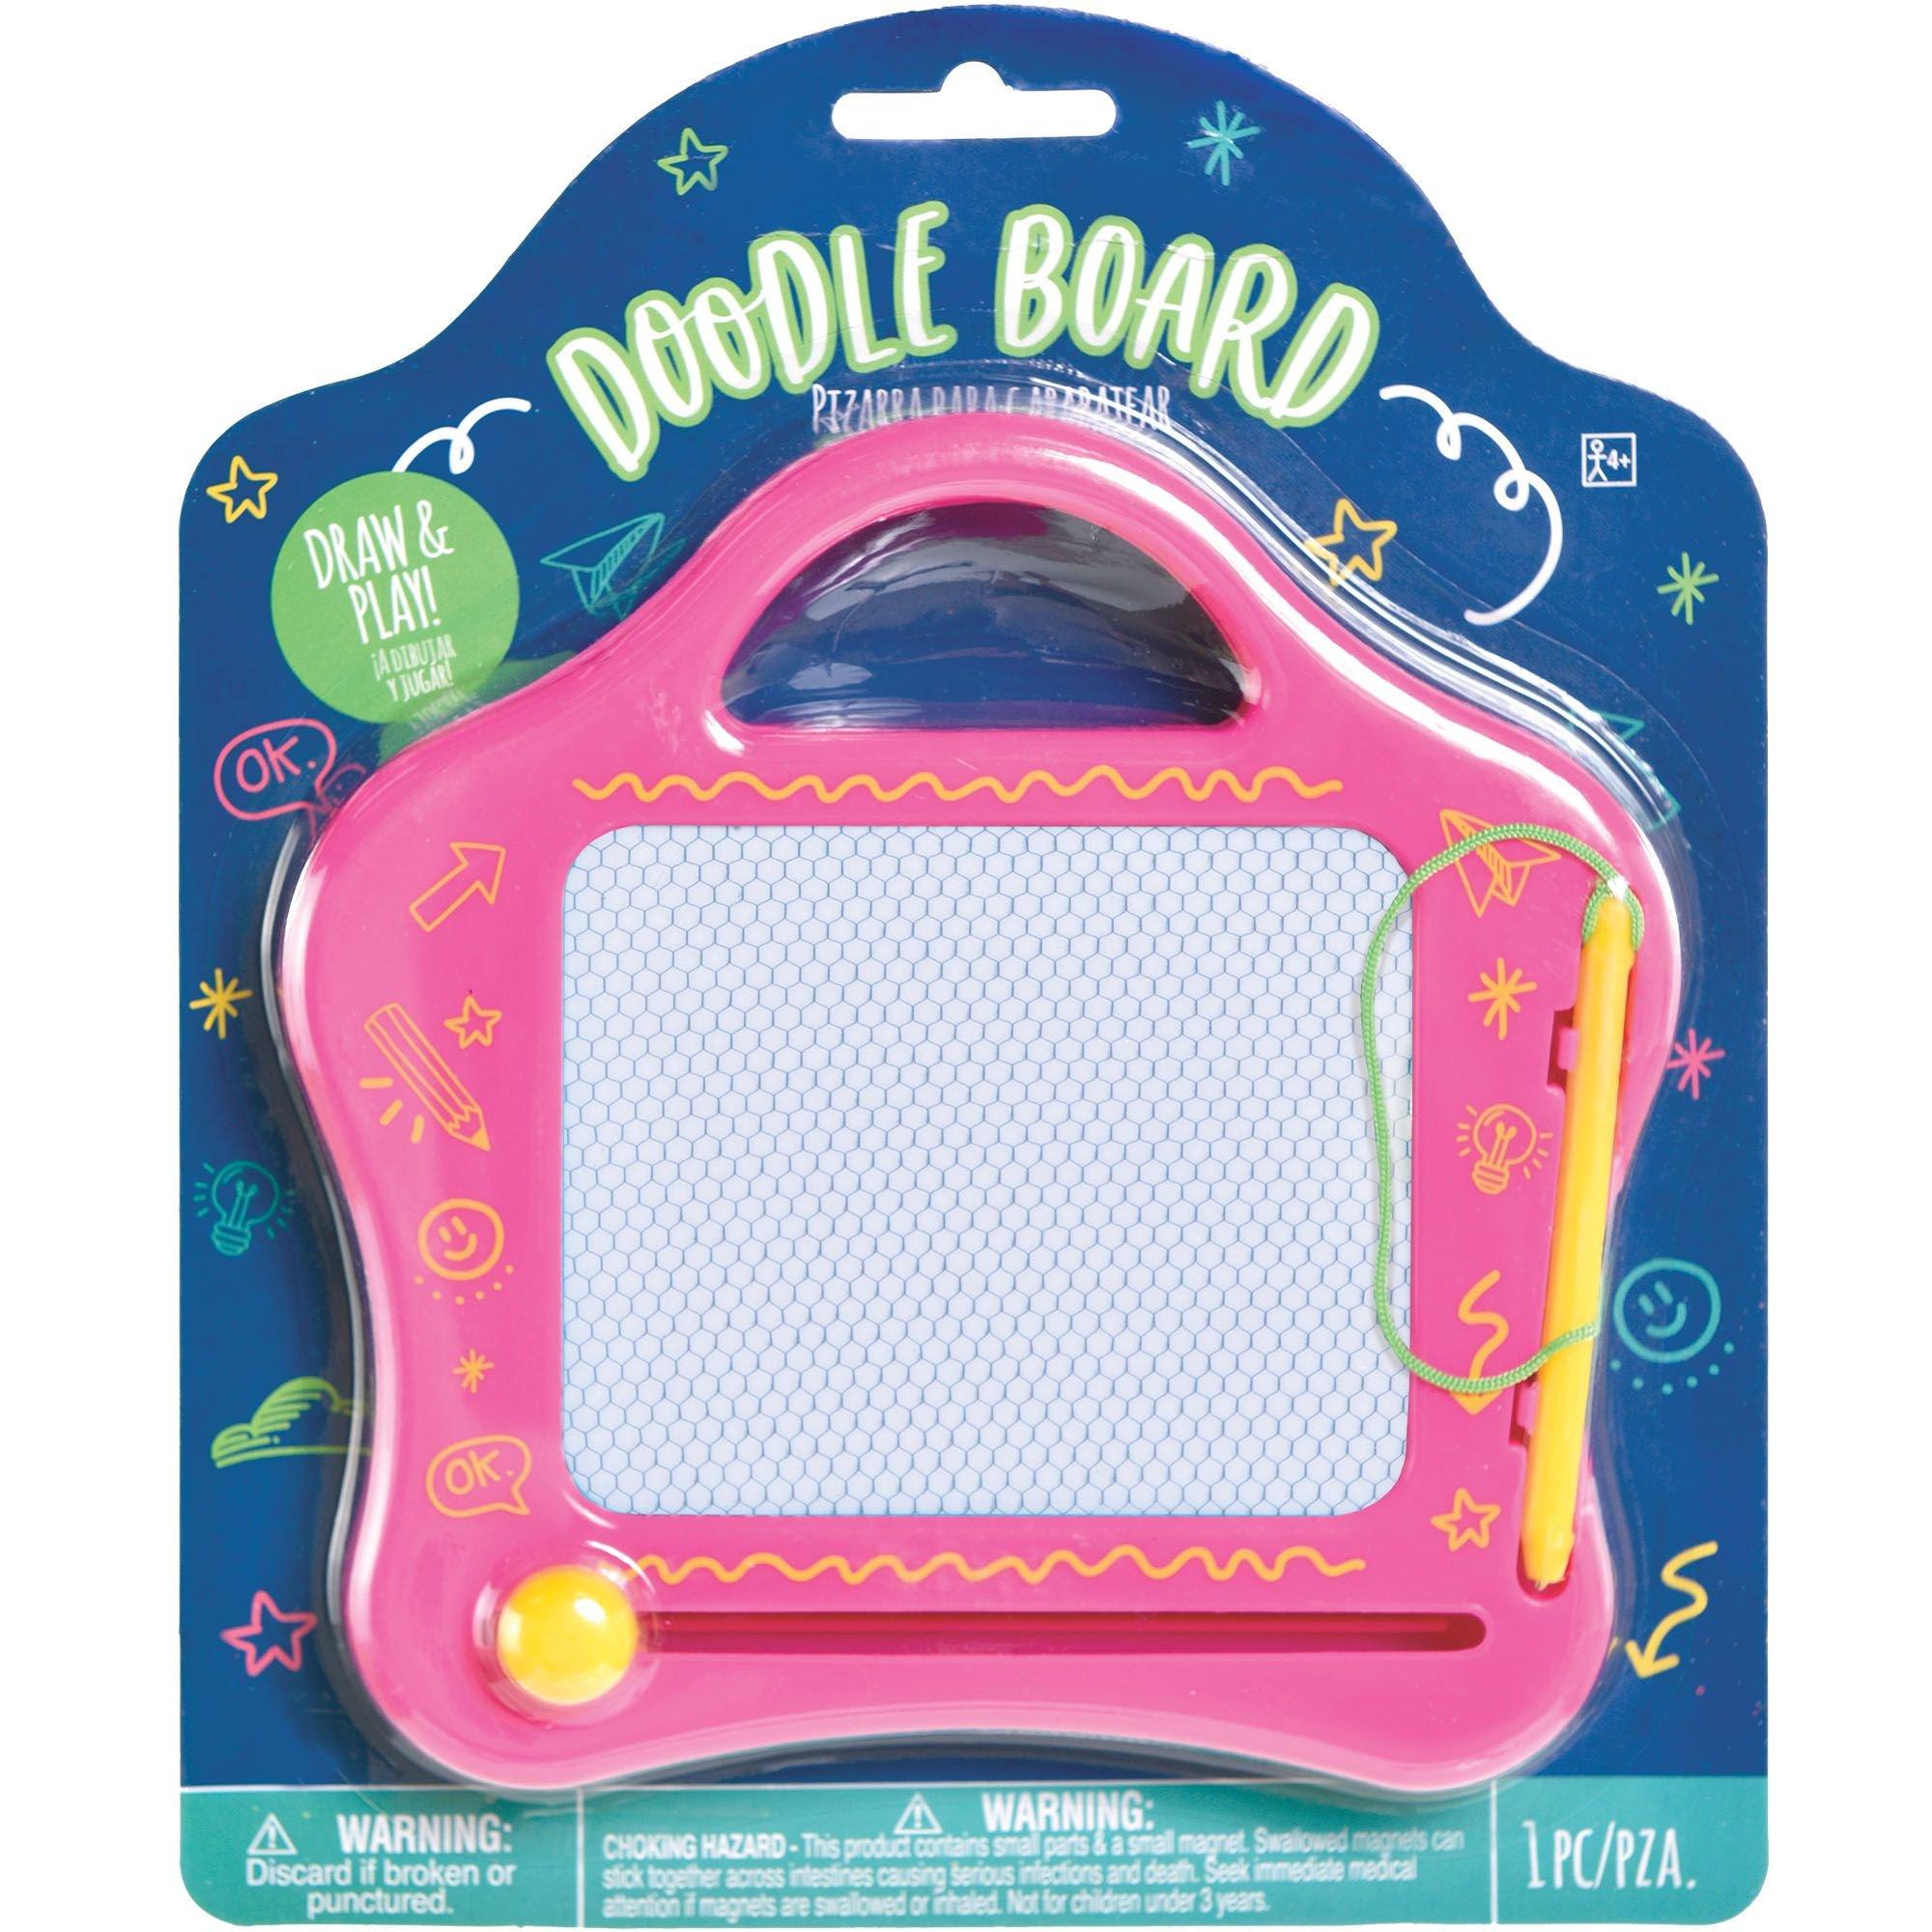 Magnetic Drawing Board,Magnetic Doodle Board for Kids Large Etch